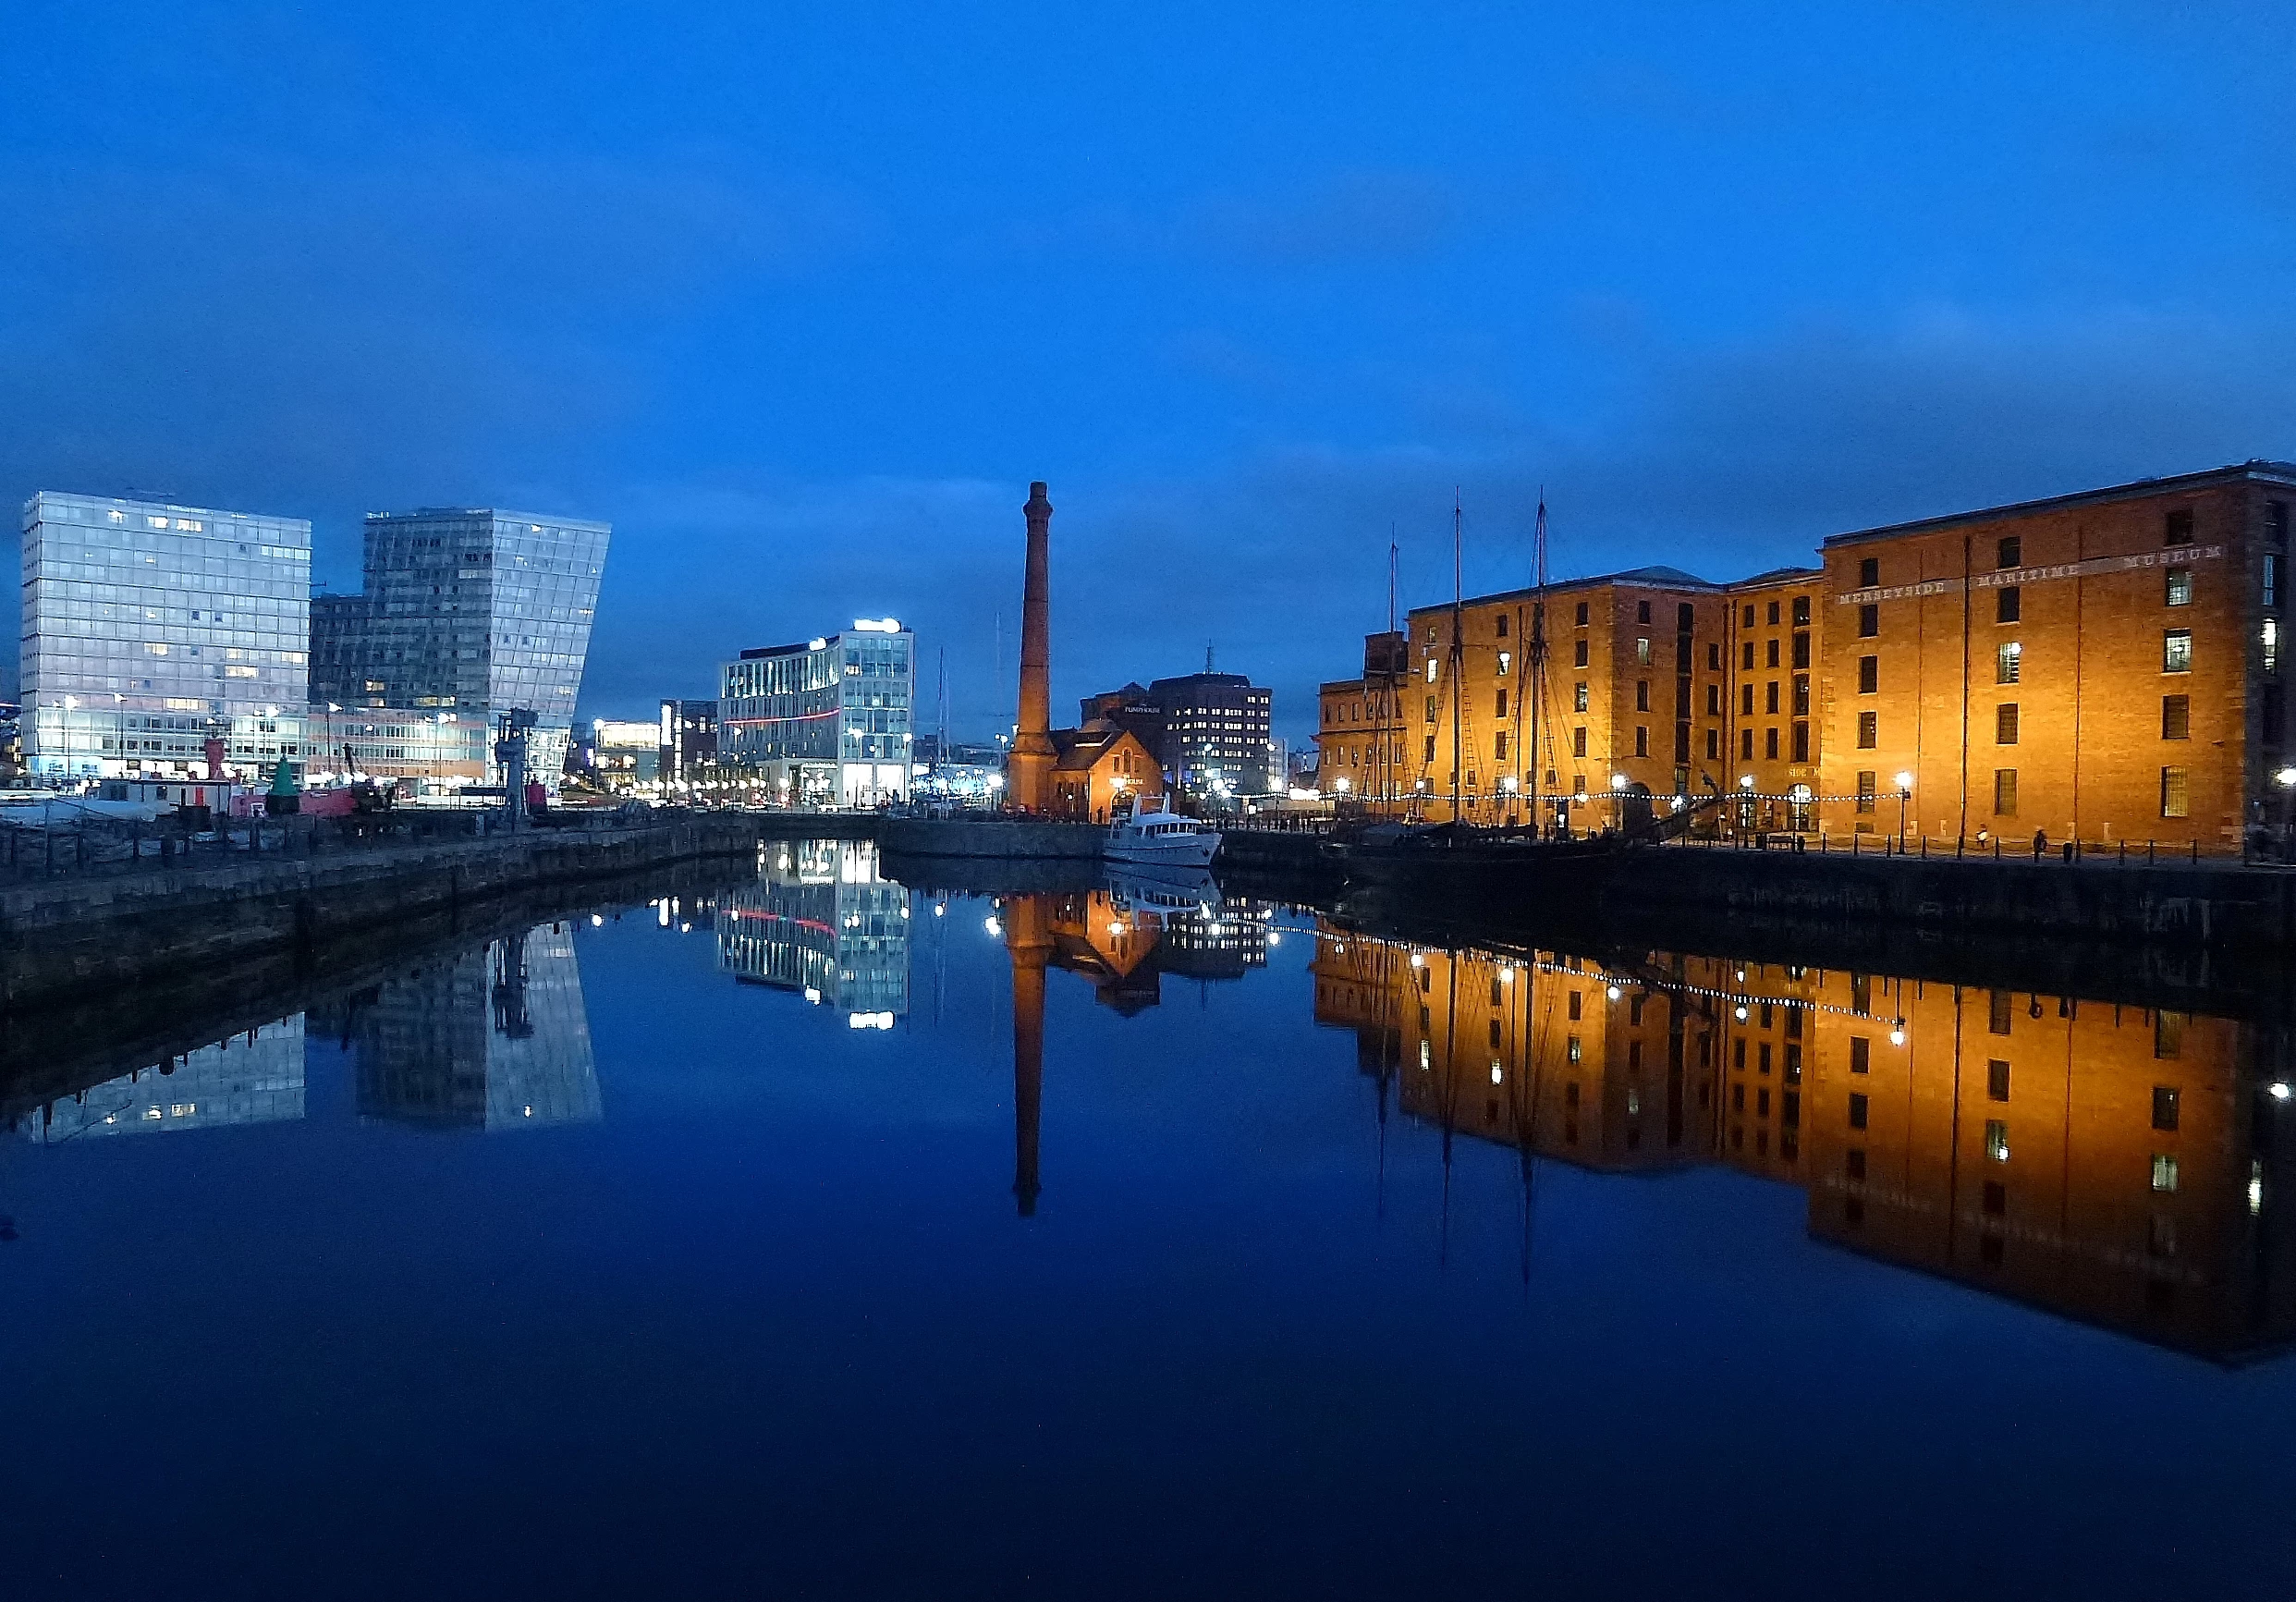 Albert Dock and Canning Half Tide Dock Liverpool, at dusk today.